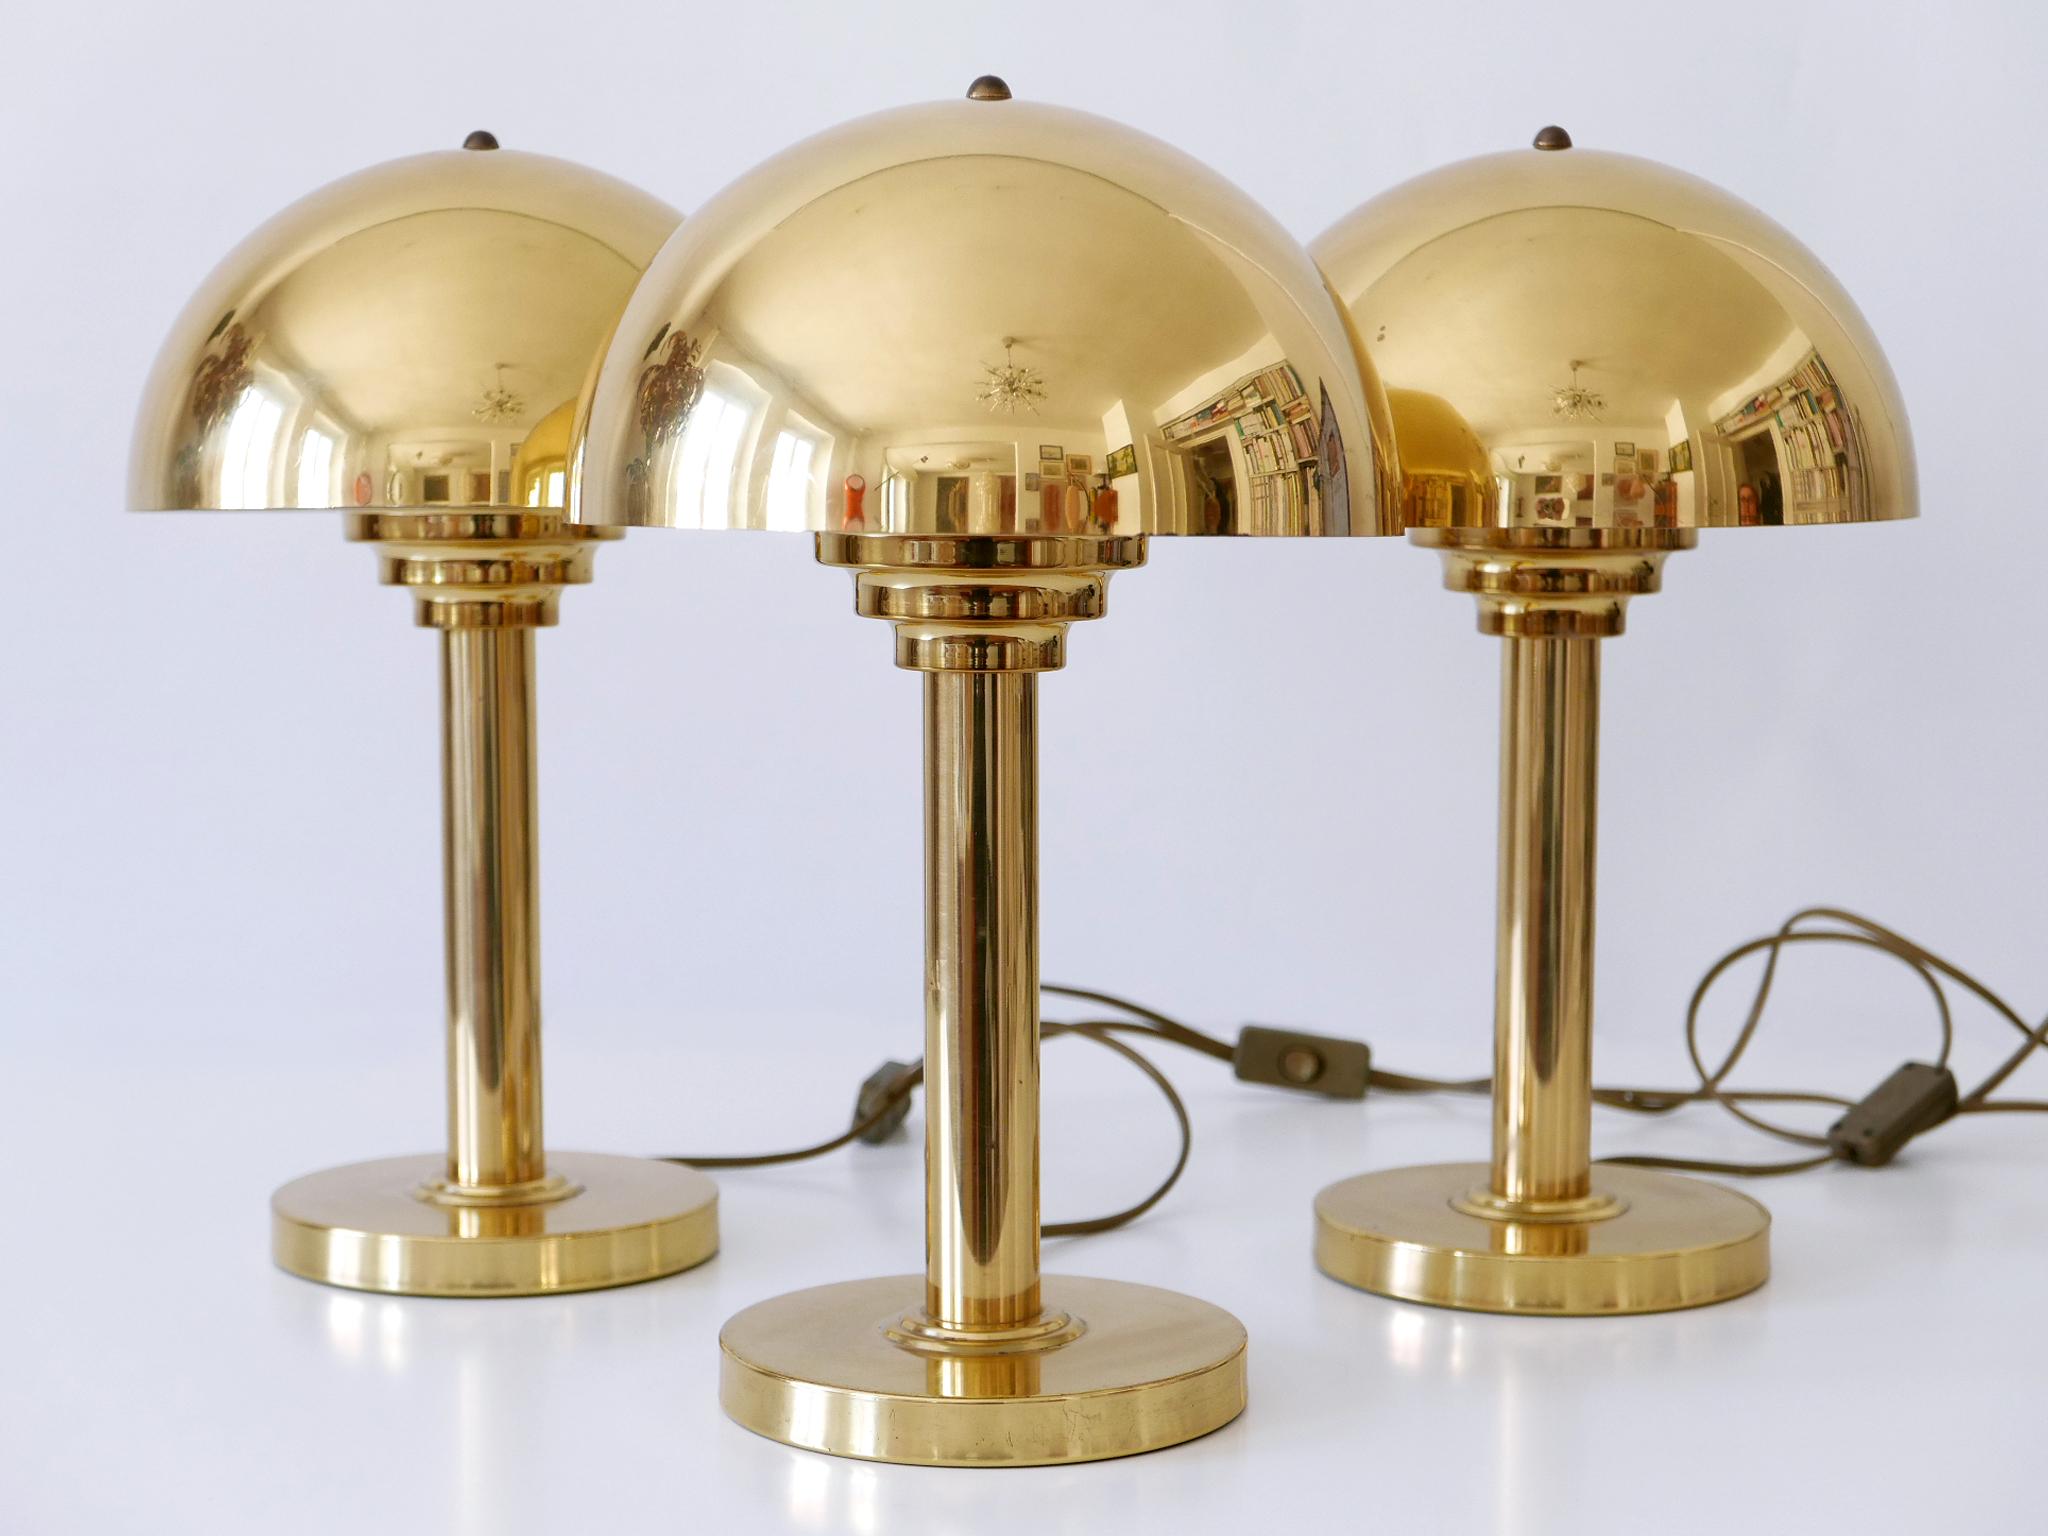 Elegant Mid-Century Modern Brass Table Lamps by WSB, Germany, 1960s For Sale 2